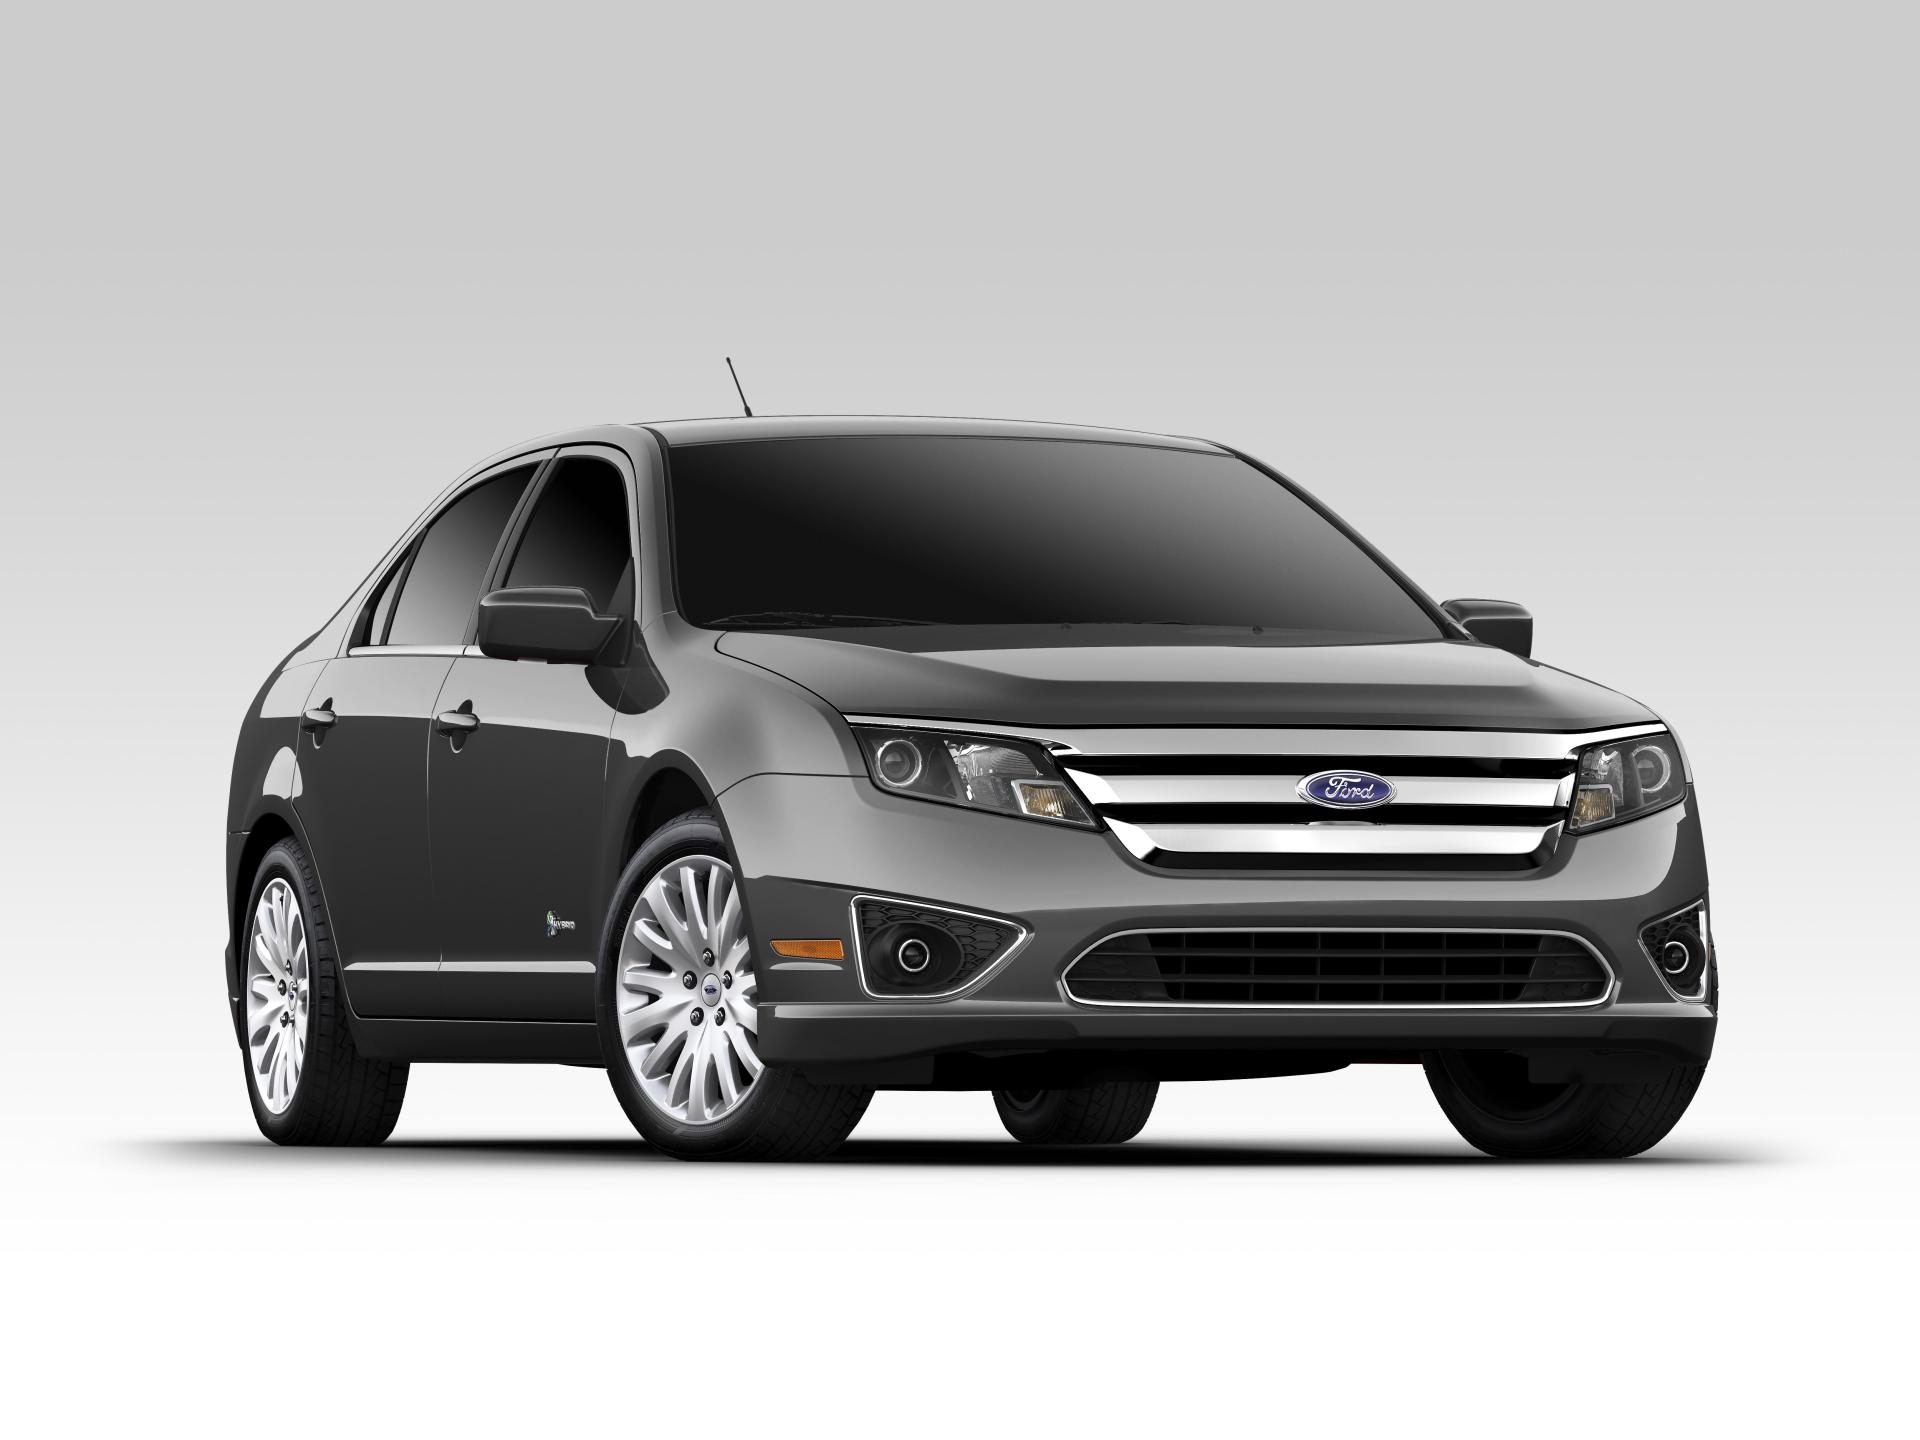 2012 Ford Fusion Hybrid Image Photo 8 Of 10